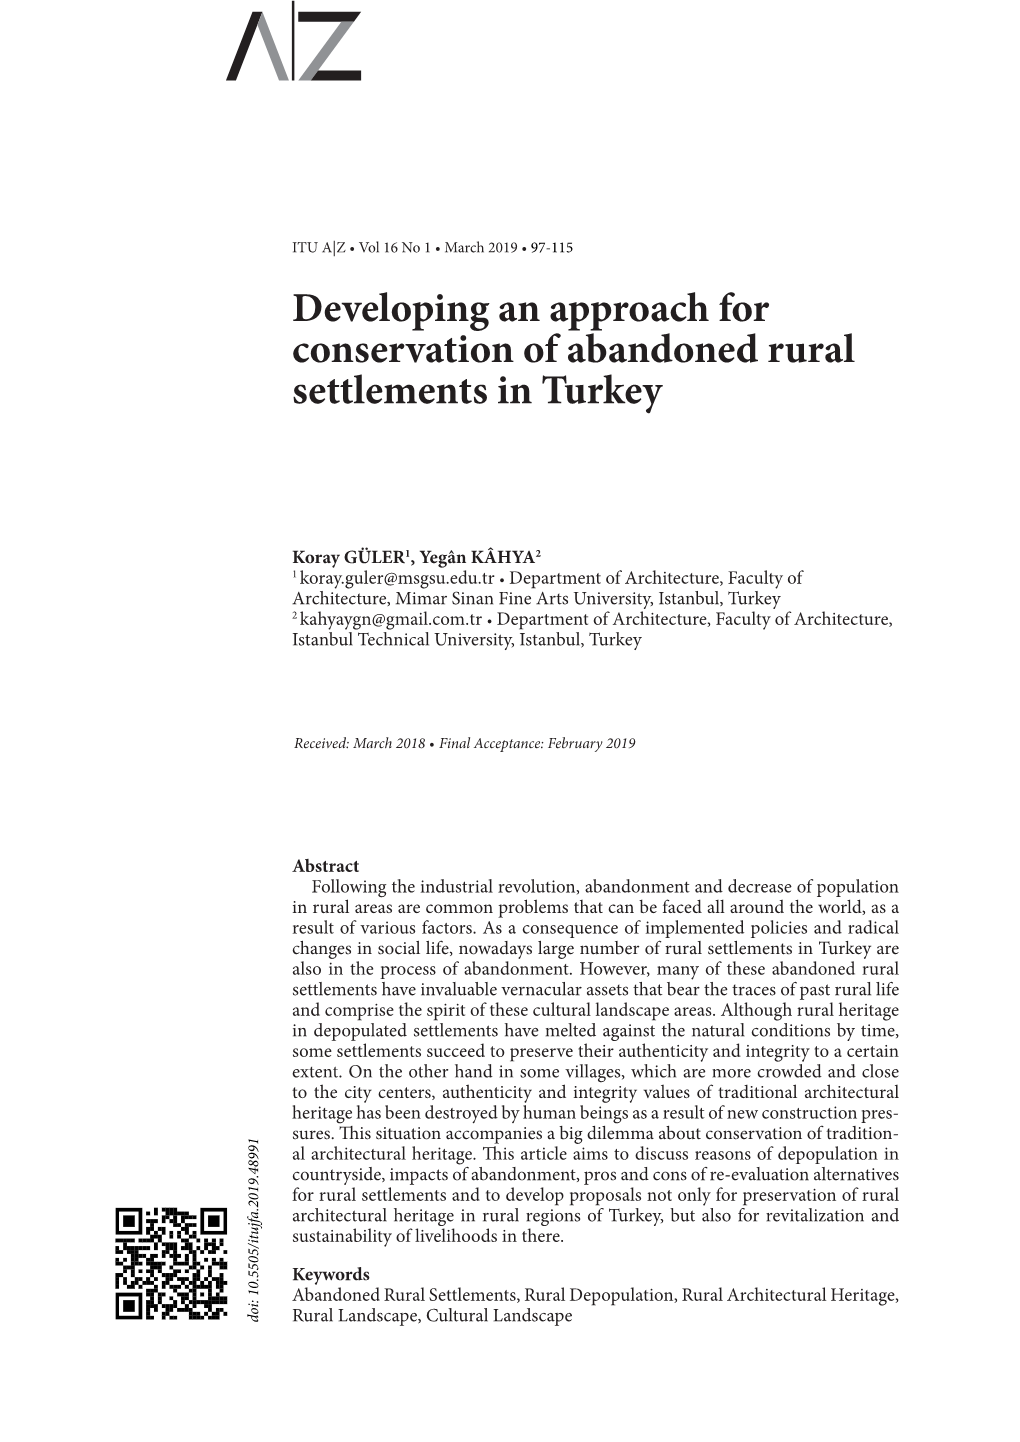 Developing an Approach for Conservation of Abandoned Rural Settlements in Turkey